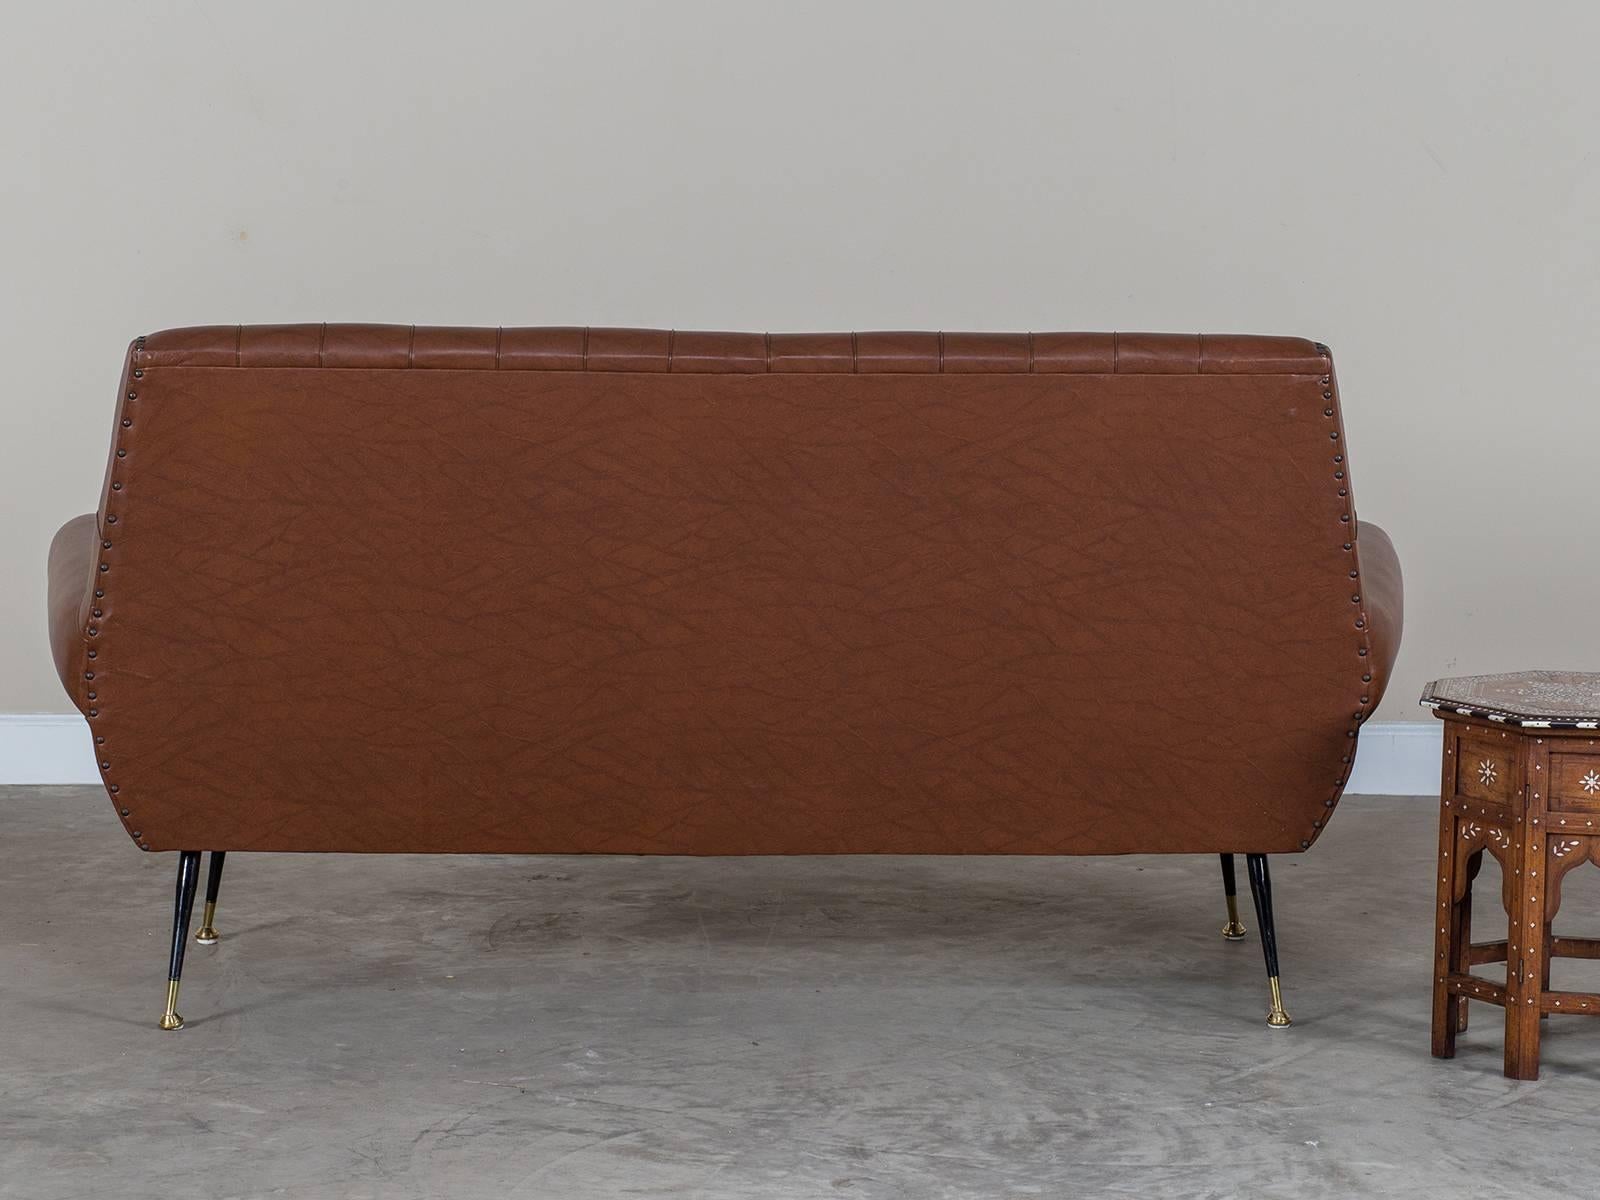 Vintage Mid-Century Italian Sofa, circa 1960 In Excellent Condition For Sale In Houston, TX